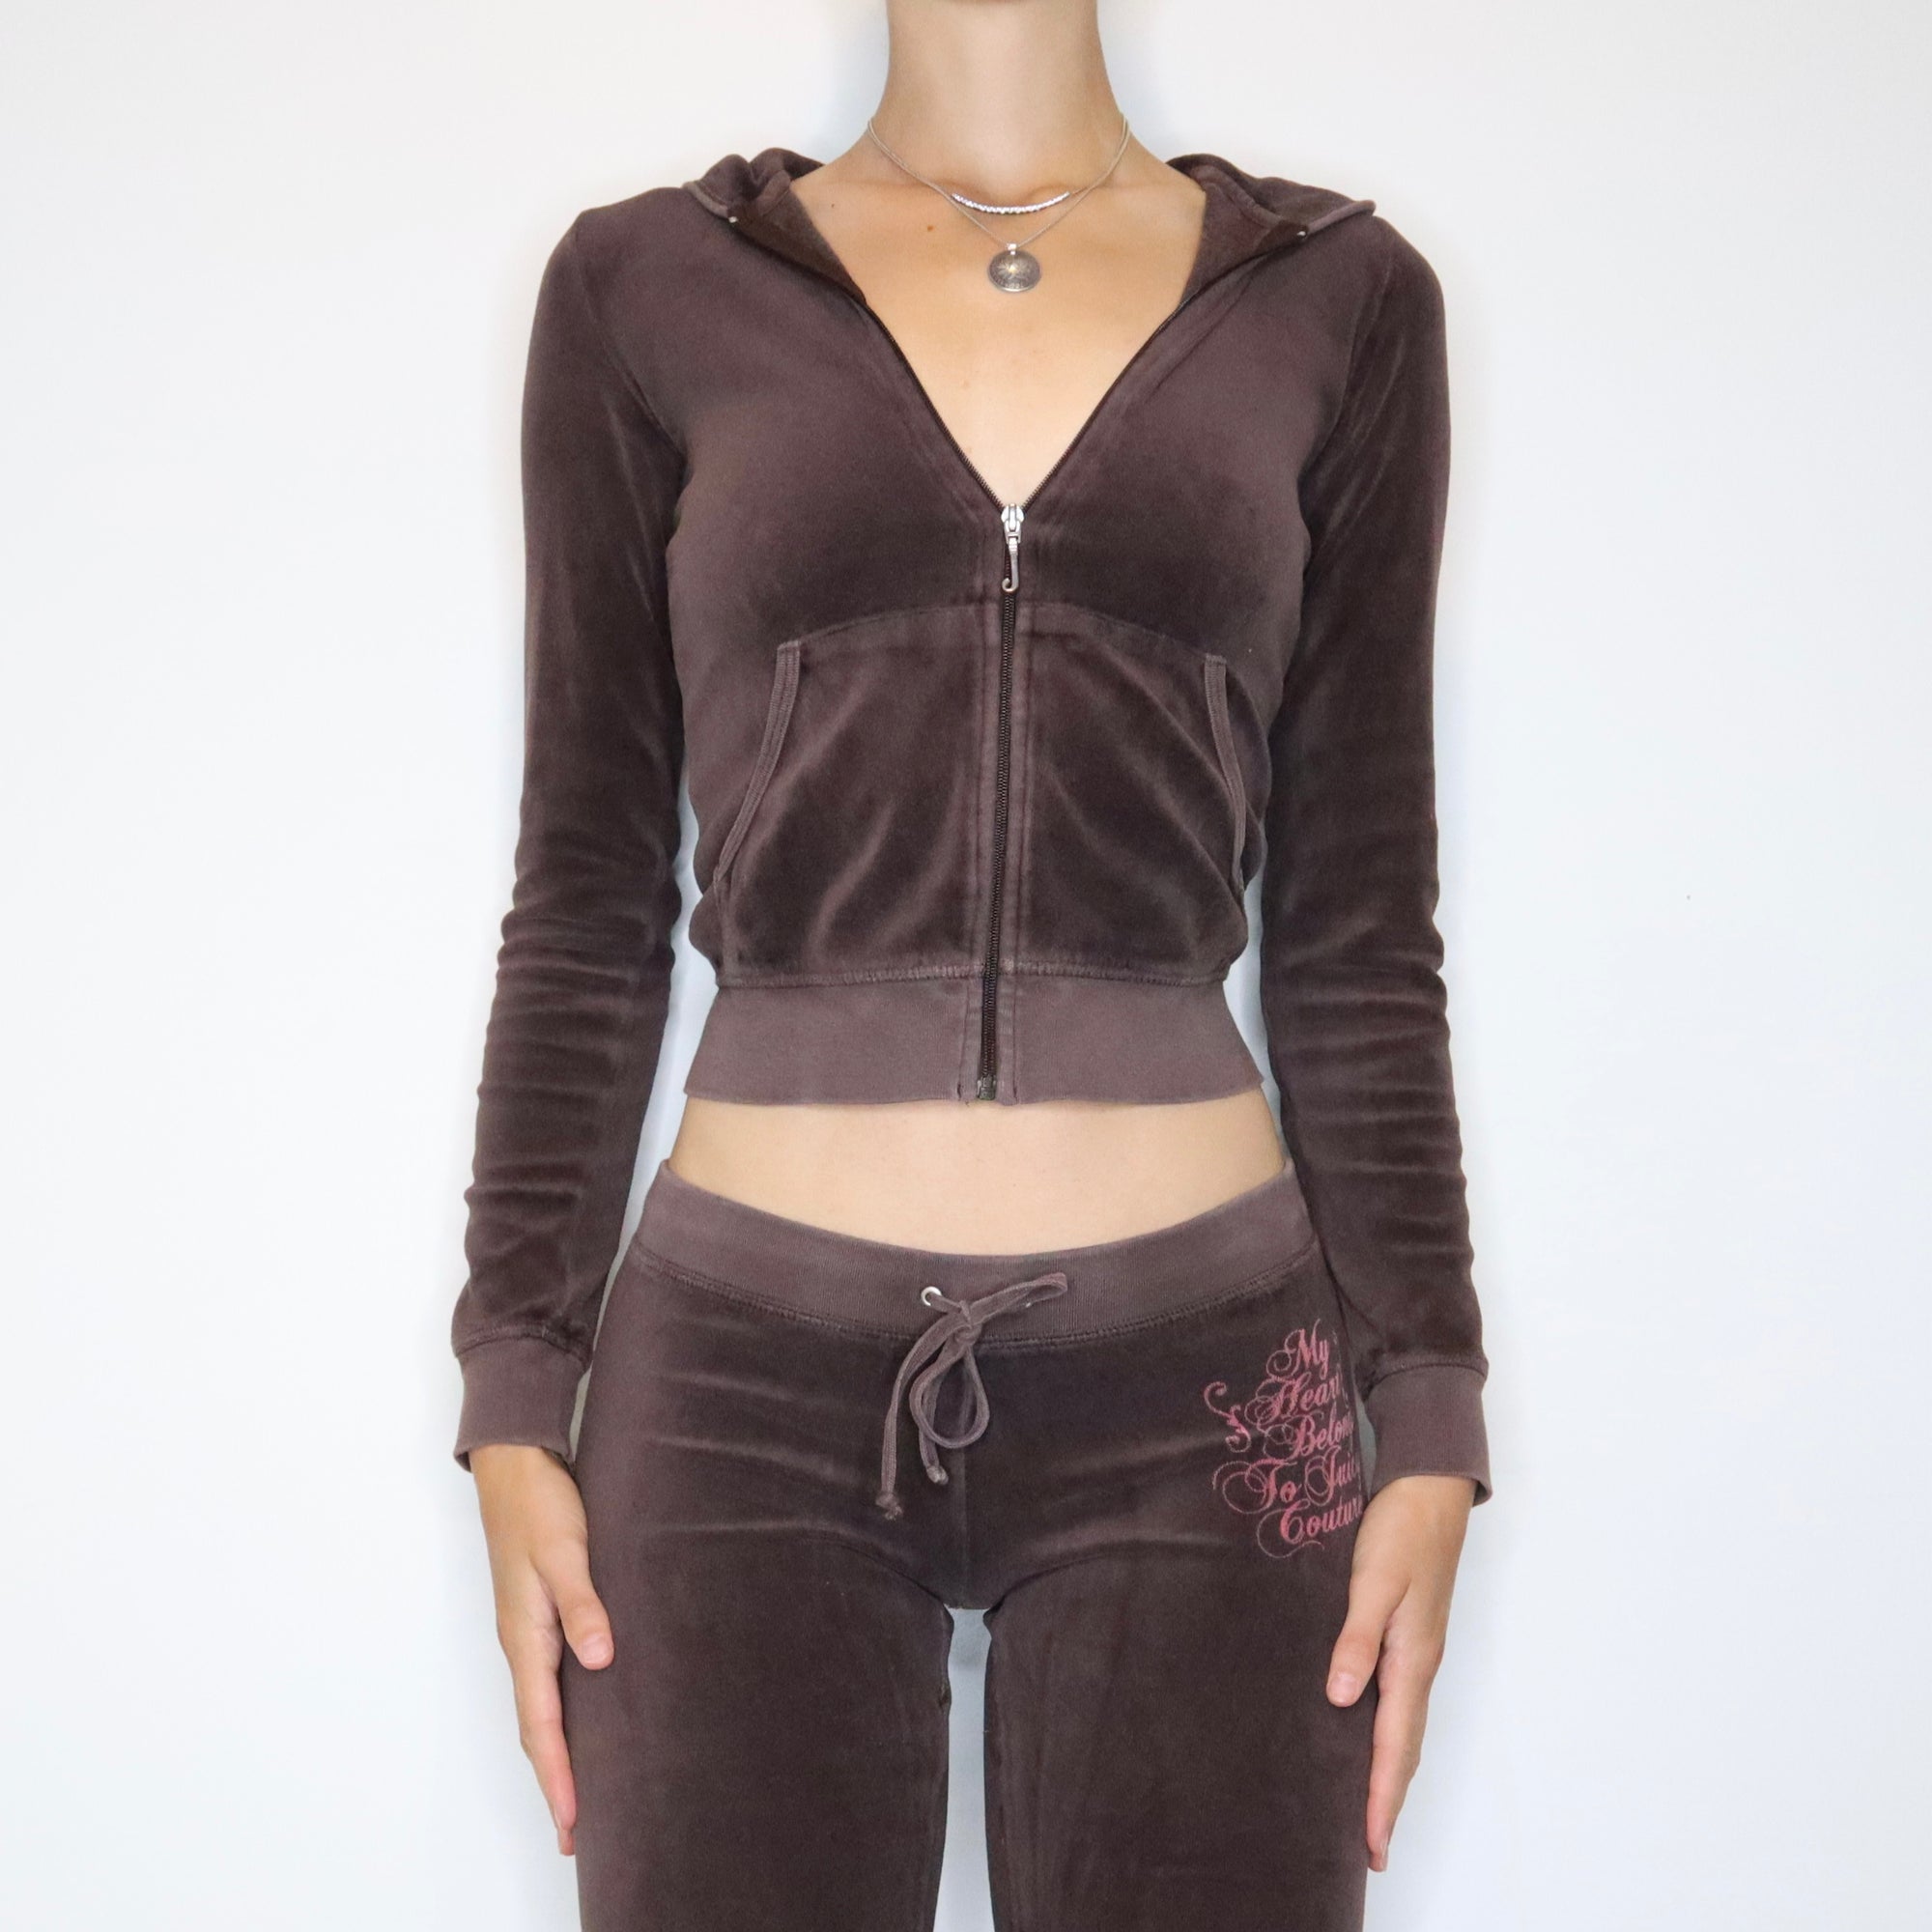 Vintage Juicy Couture brown tracksuit – Tramp the label